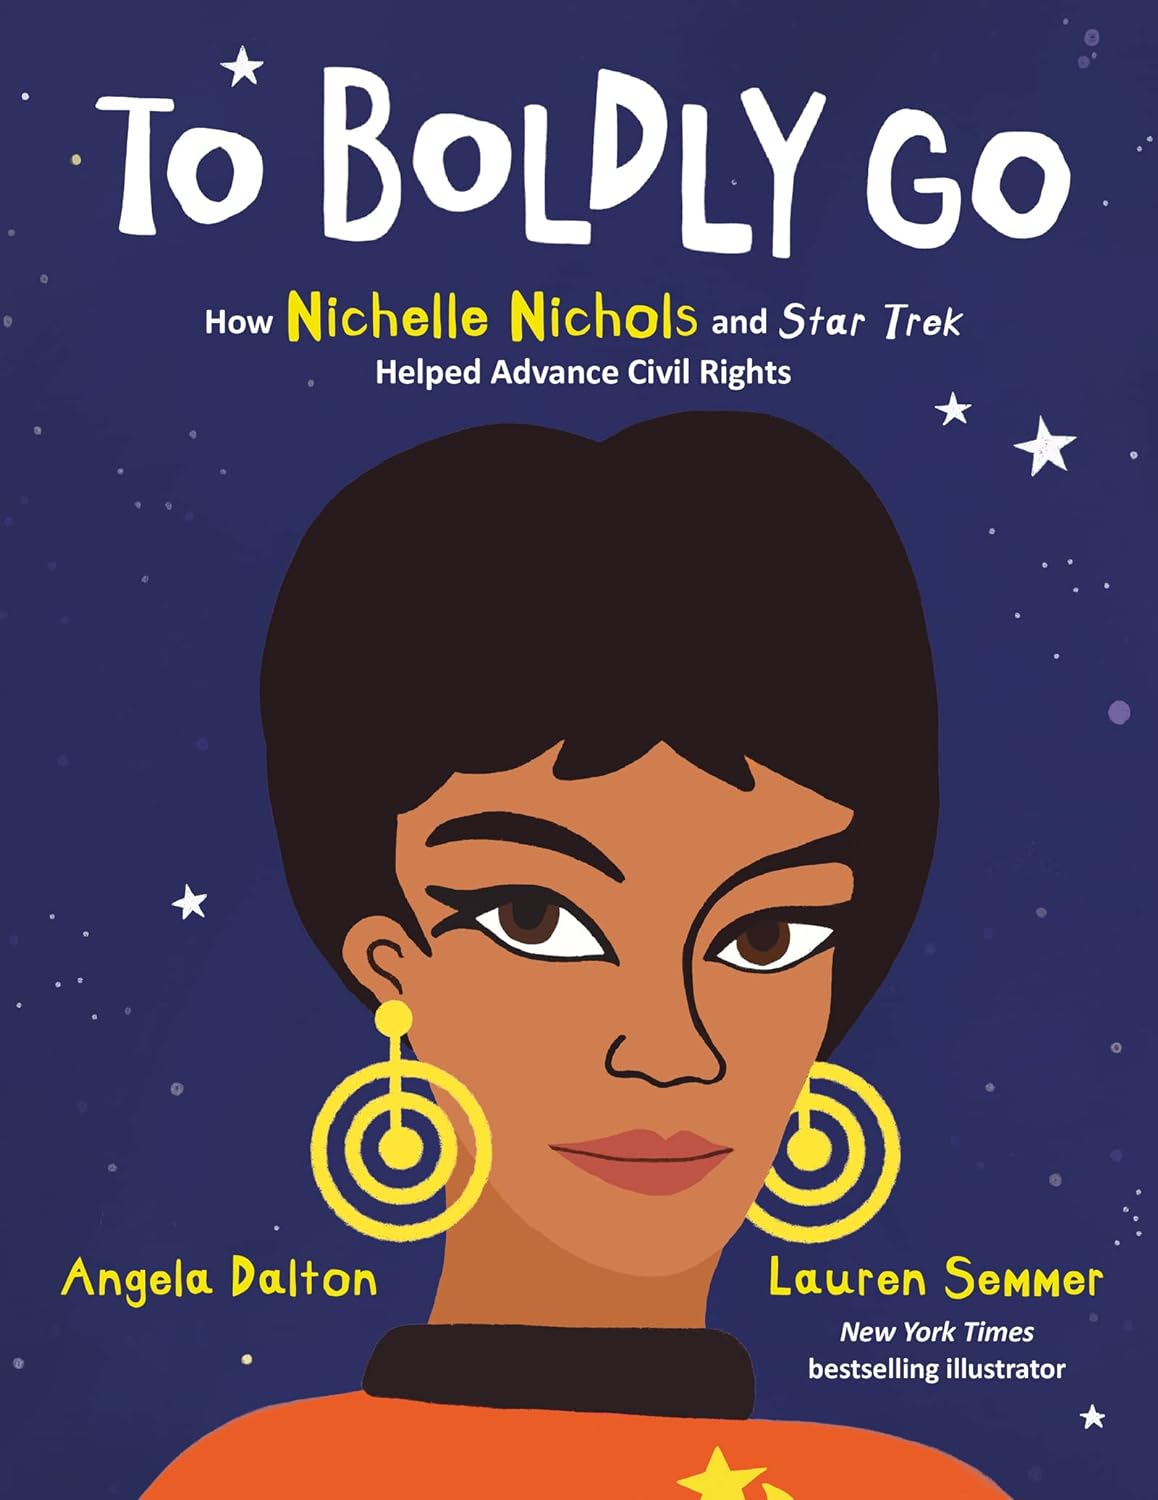 "To Boldly Go: How Nichelle Nichols and Star Trek Helped Advance Civil Rights" book cover, illustration of Nichelle Nichols